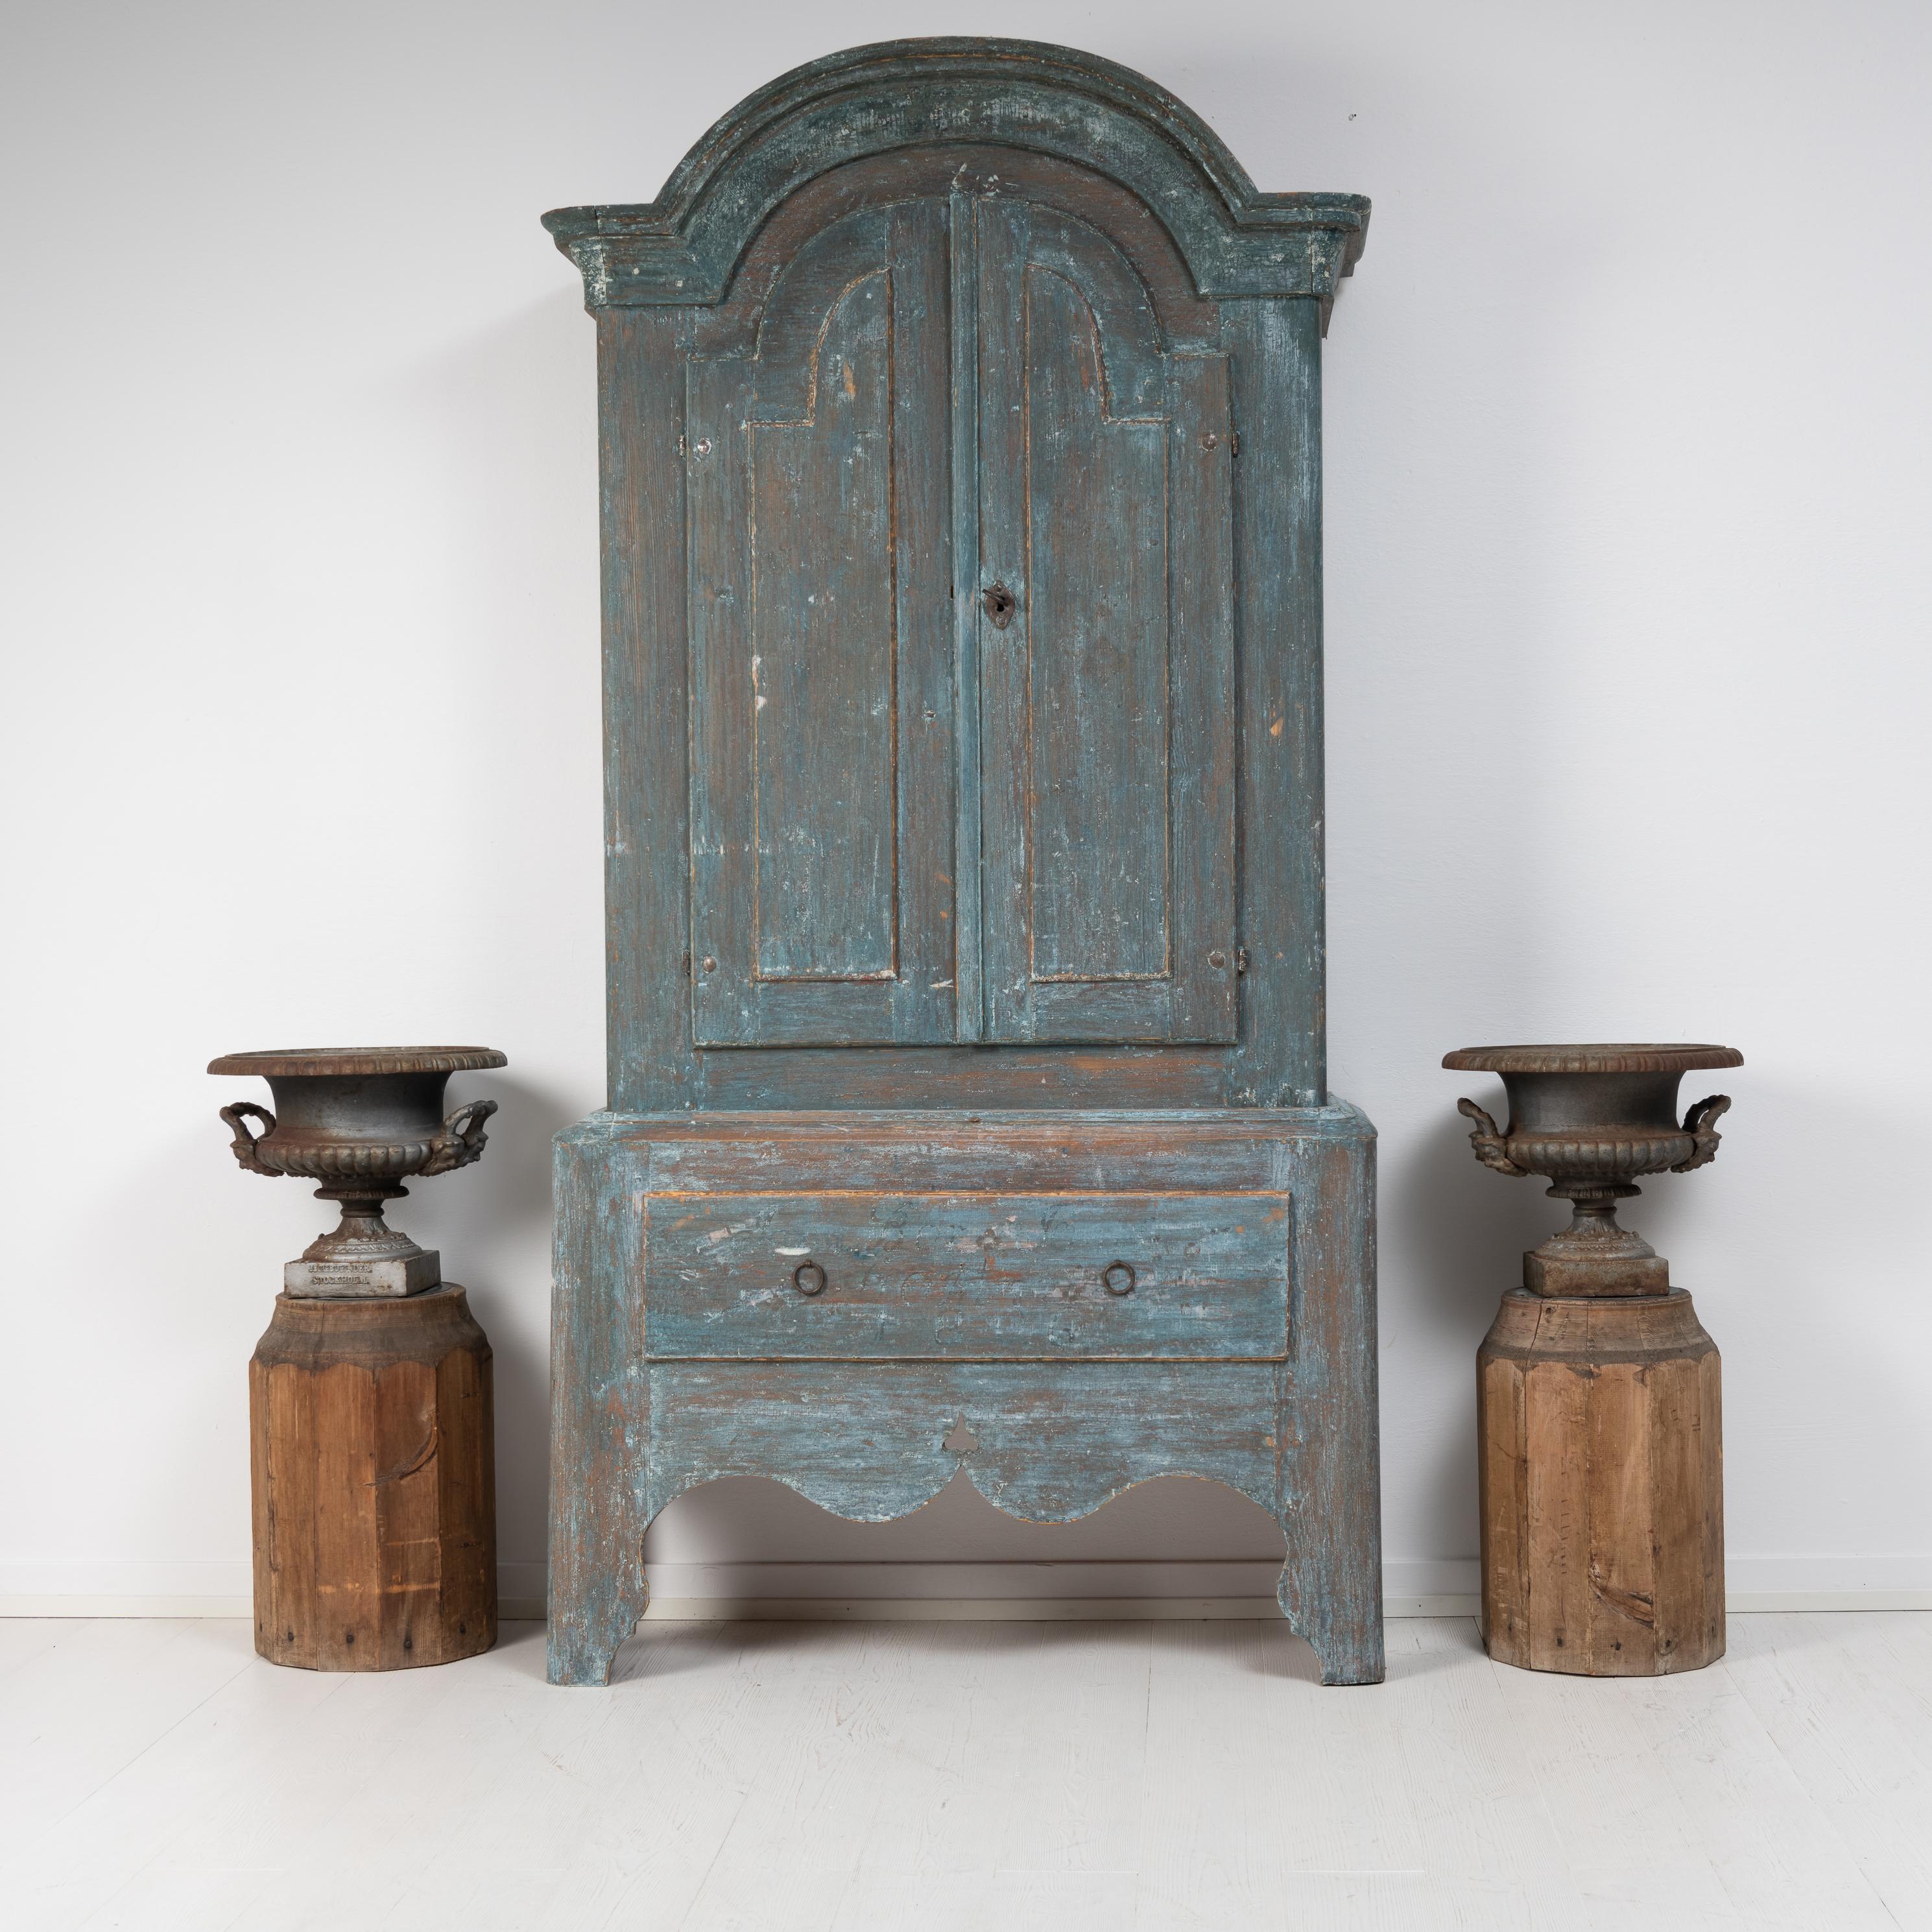 Pair of antique Swedish decorative pedestal in pine. The pedestals are made in pine with an 12-sided shape where each side is it’s own board. They have never been painted so the pine has the authentic warm patina of time. The top is covered by zink